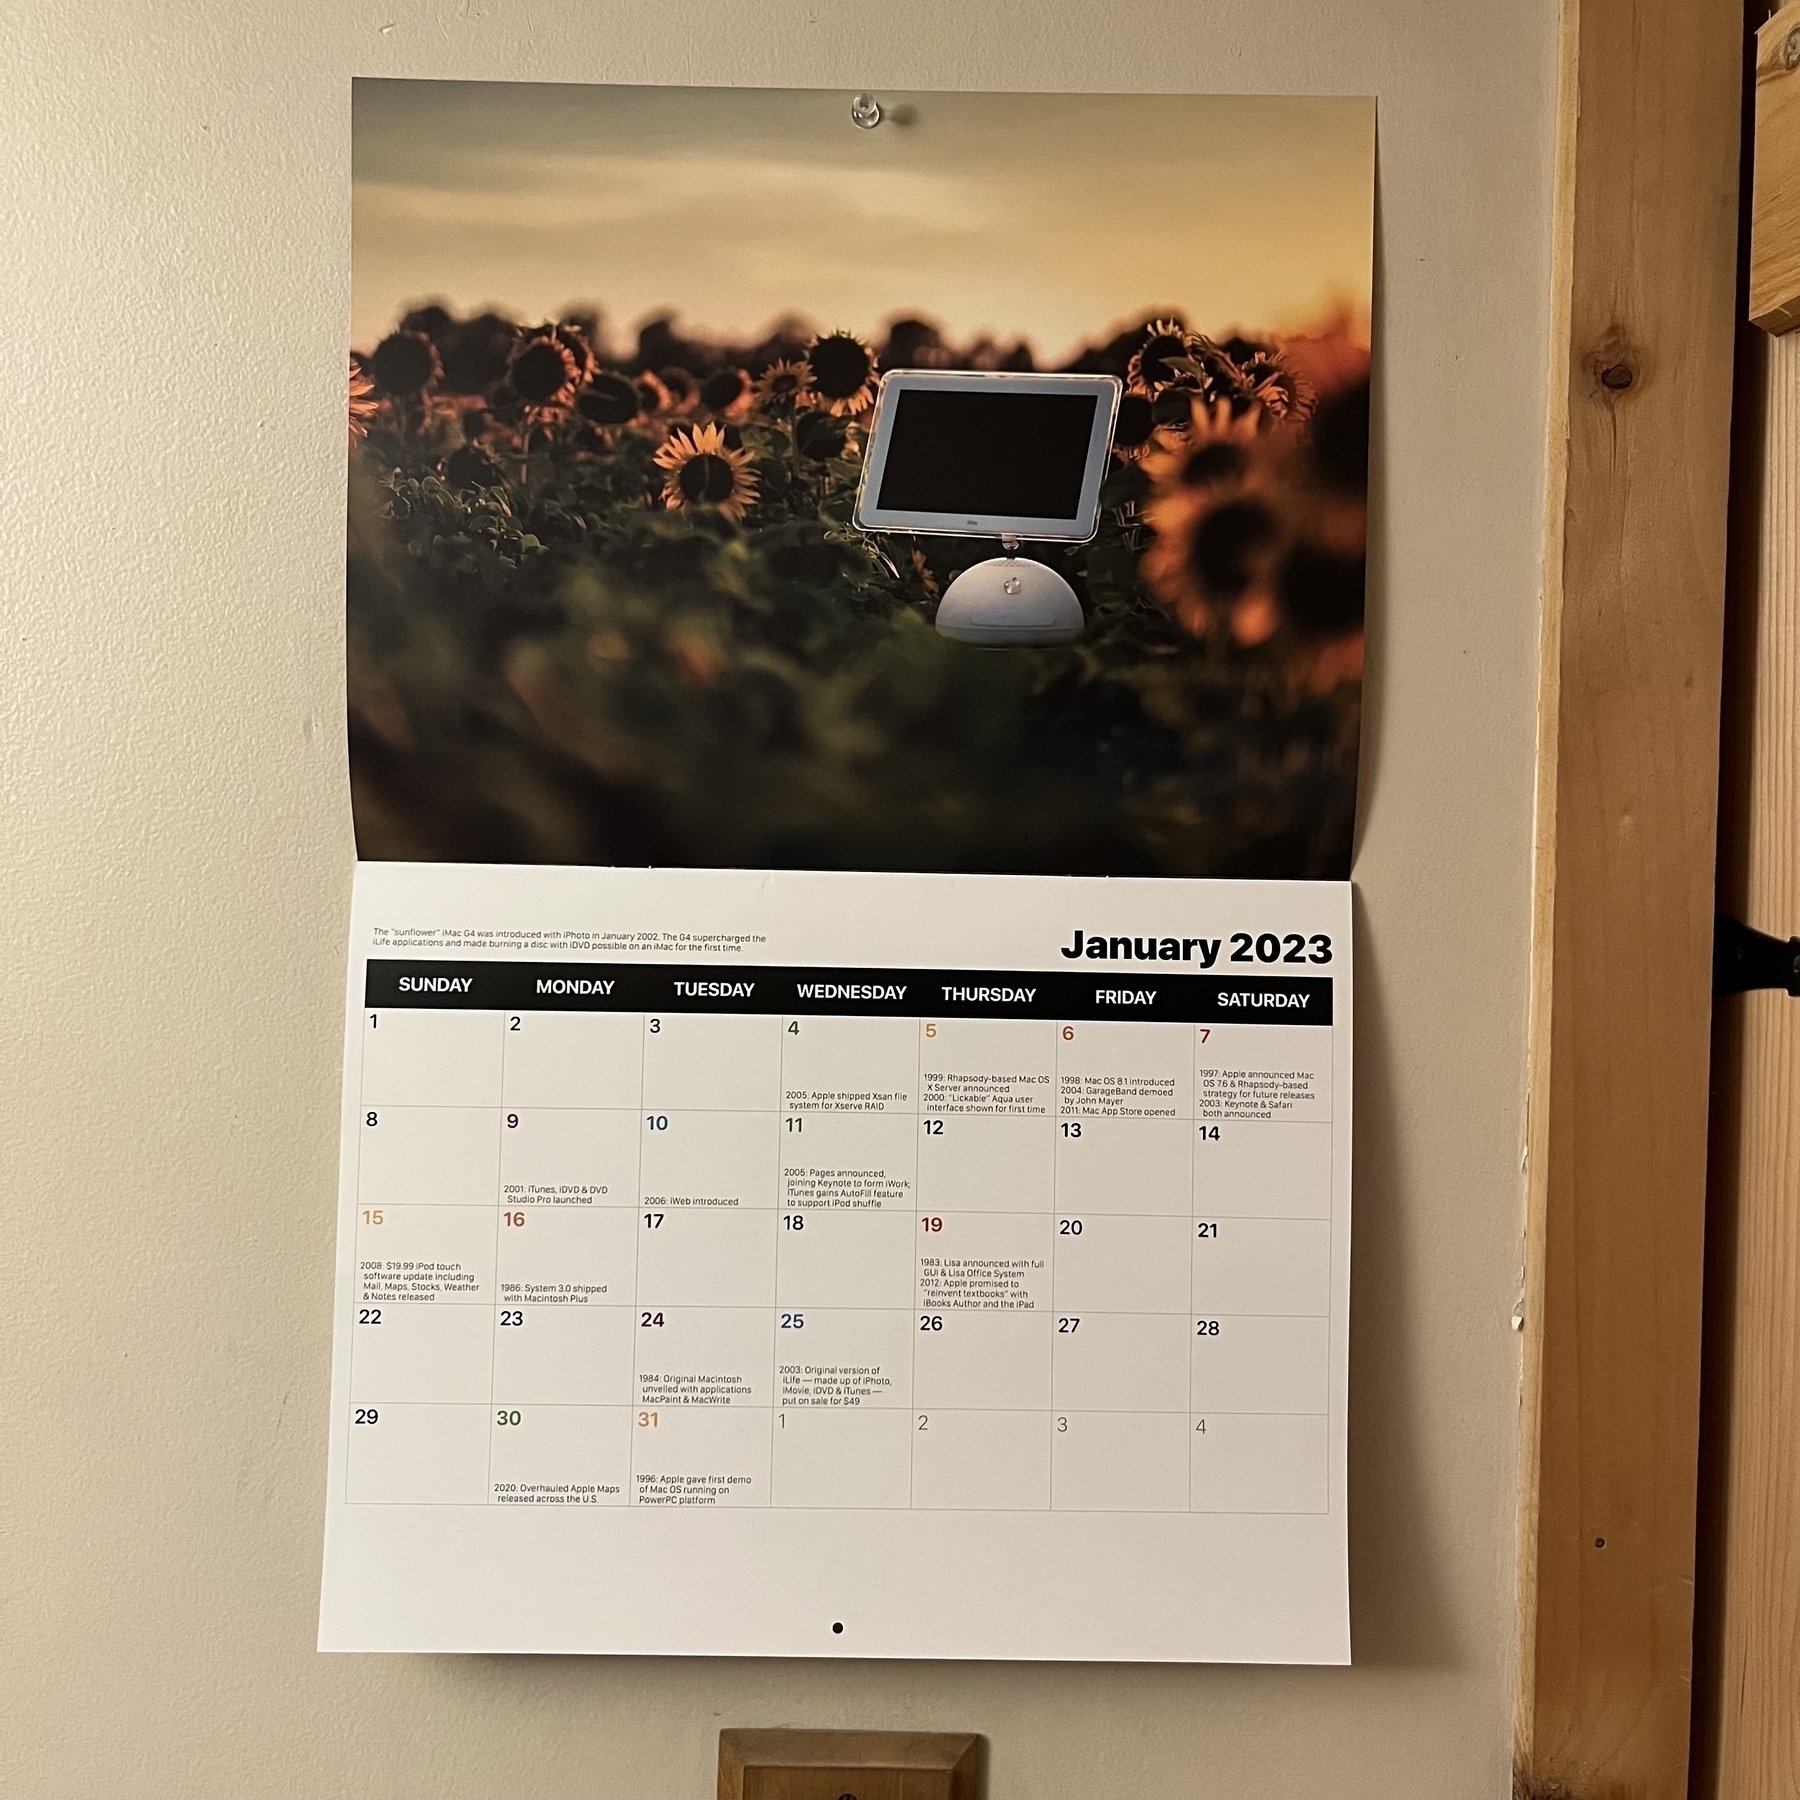 A calendar with a iMac G3 in a field of sunflowers as the featured image.